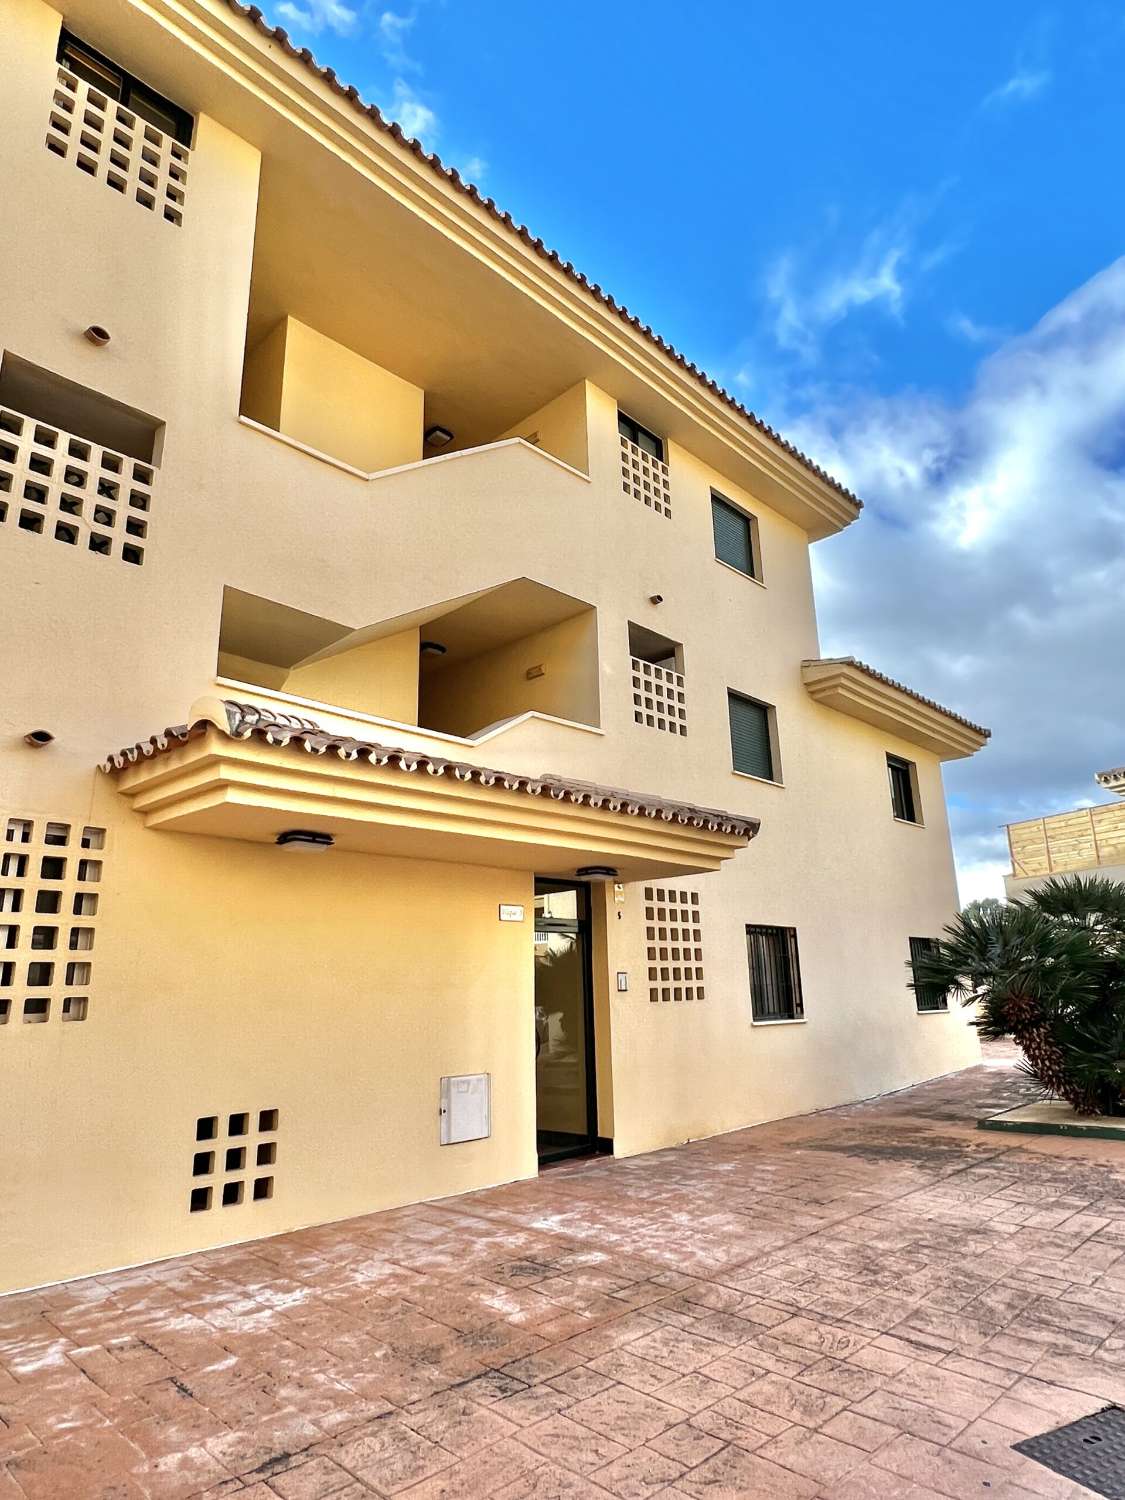 Beautifully Positioned flat in the Golf-Side Community of Doña Maria, Torrequebrada, Benalmádena.